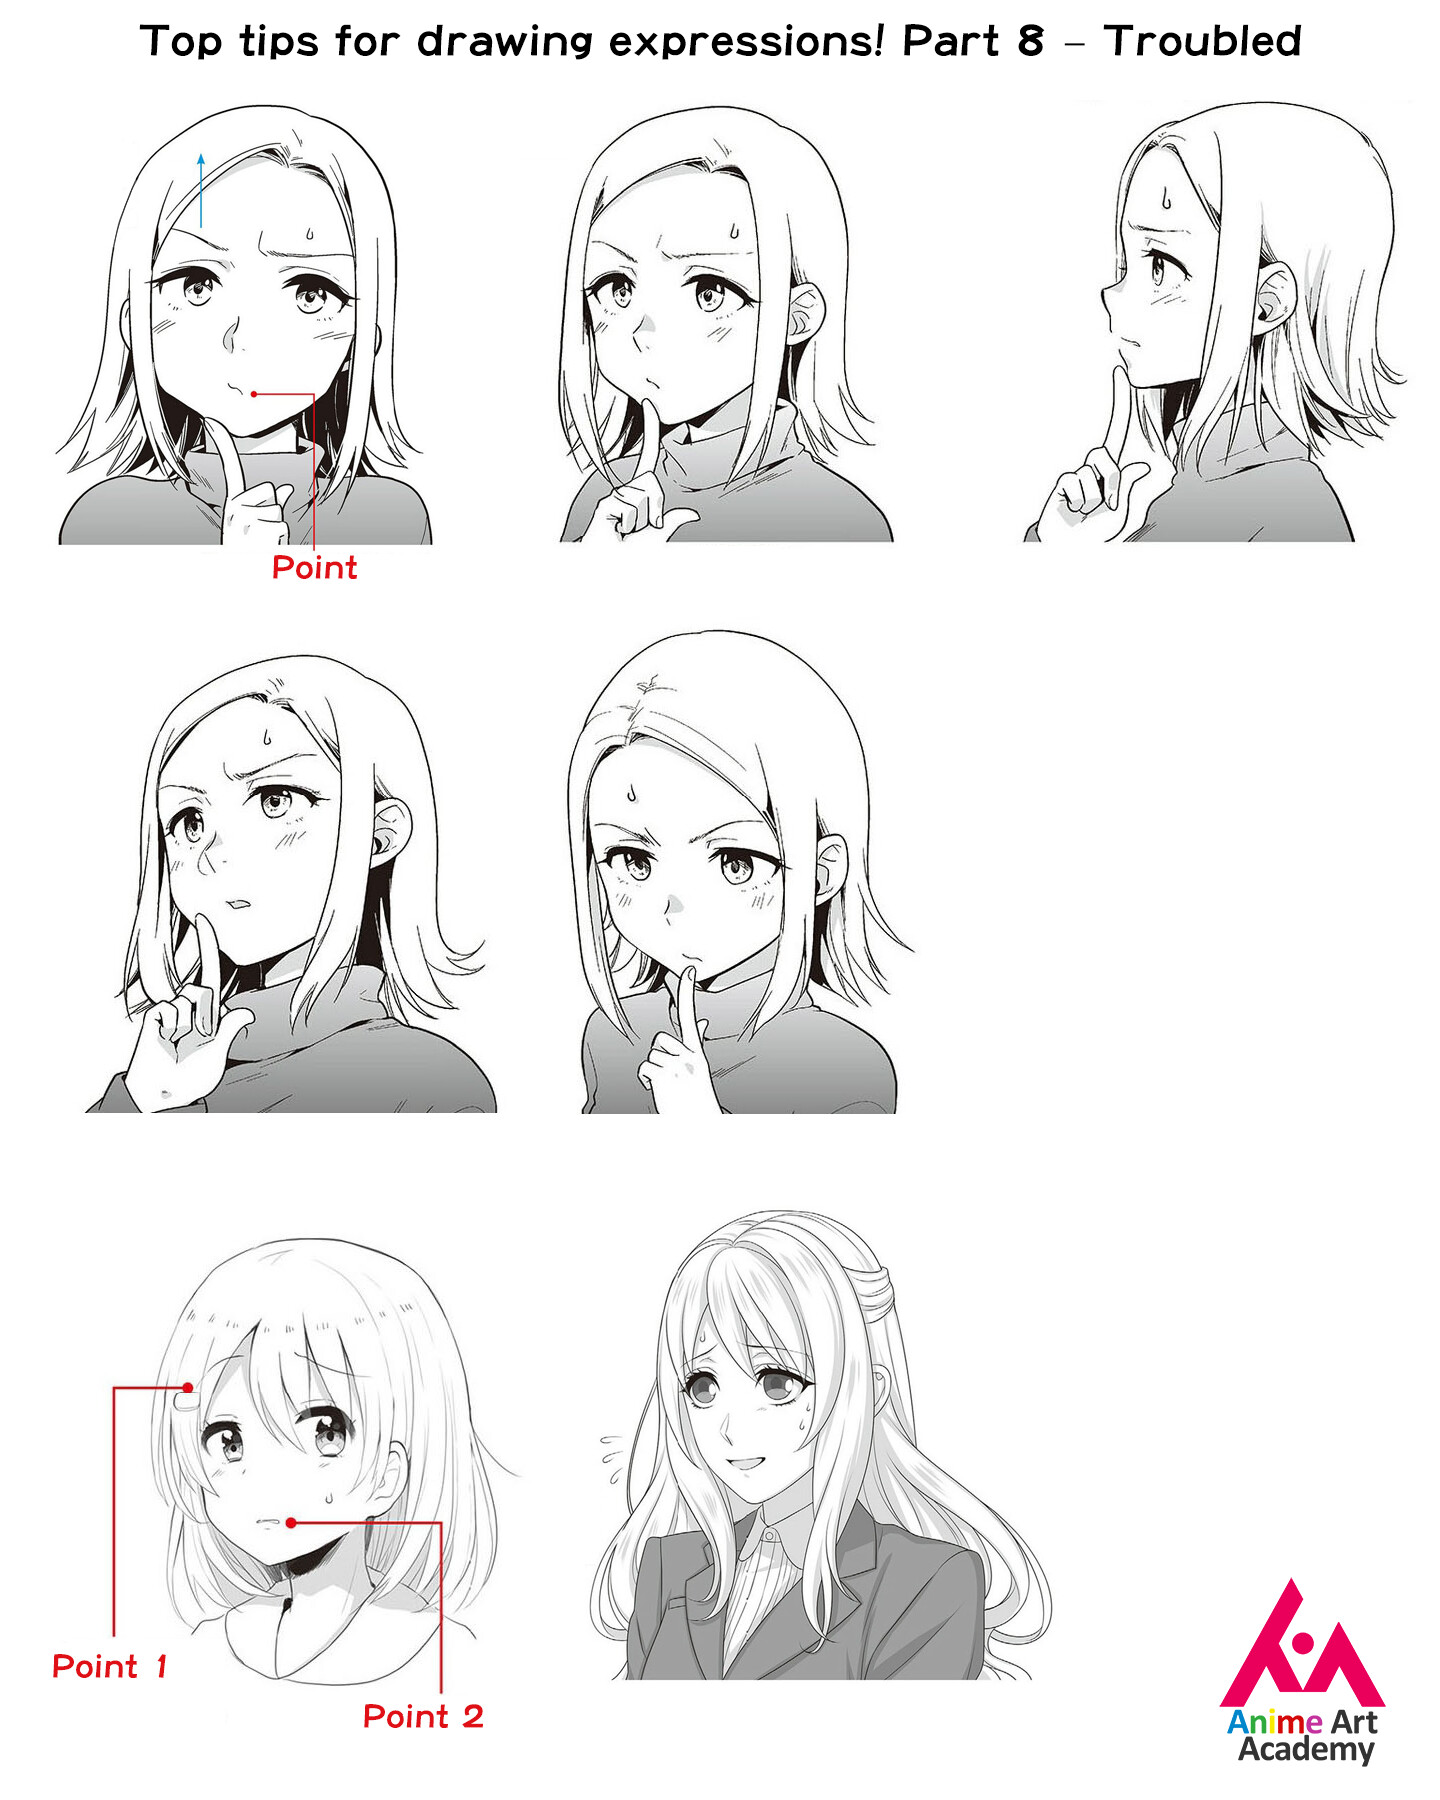 Agshowsnsw  How to draw a boy anime face